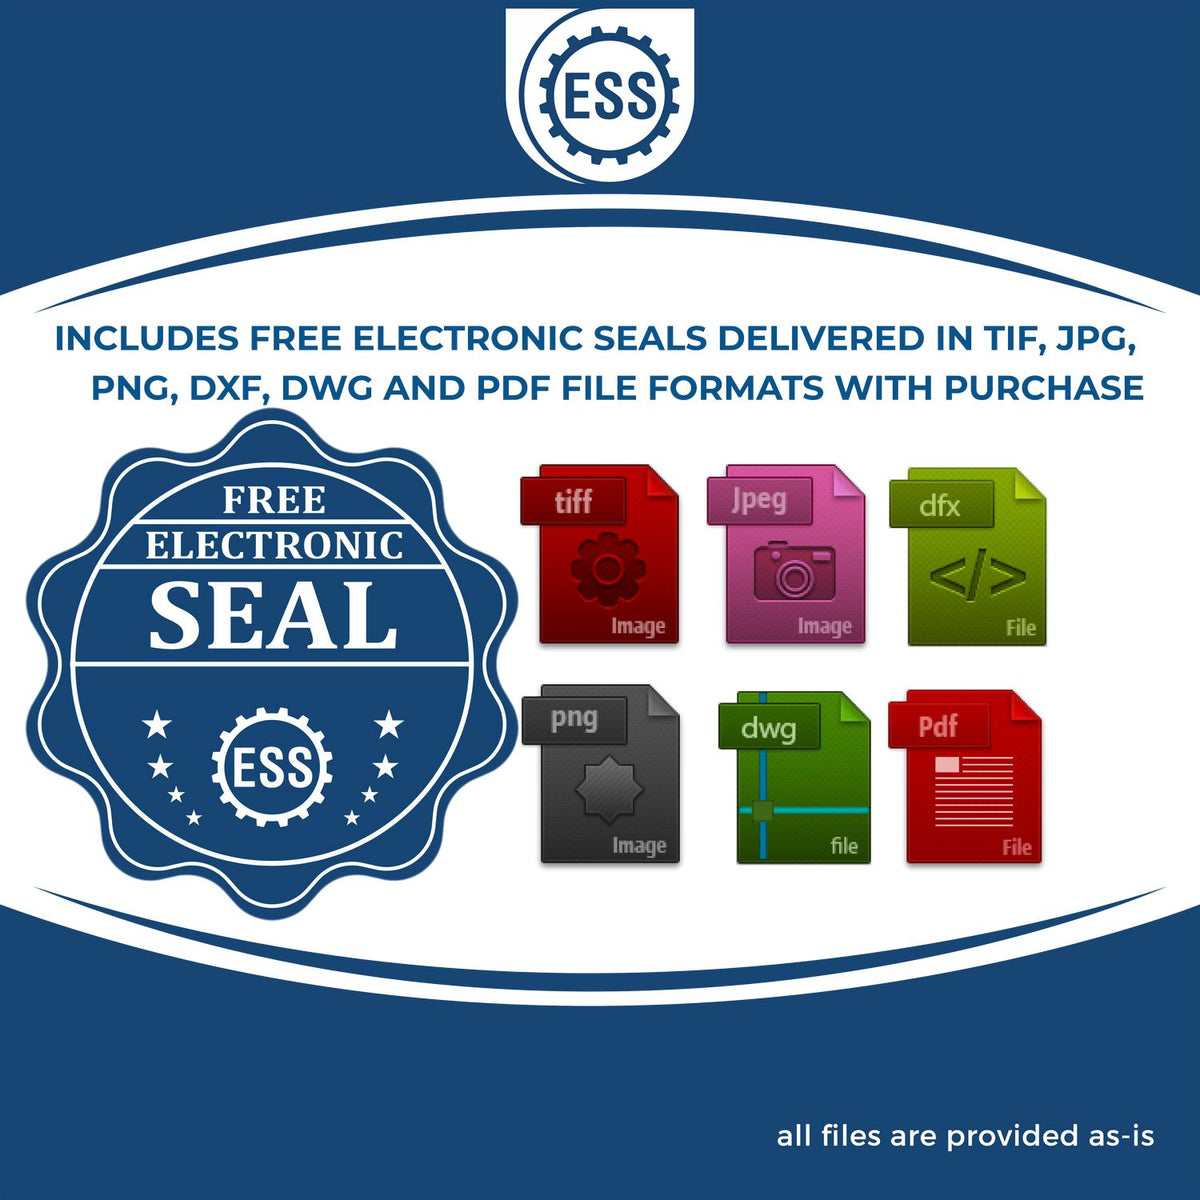 An infographic for the free electronic seal for the Long Reach Nebraska Geology Seal illustrating the different file type icons such as DXF, DWG, TIF, JPG and PNG.